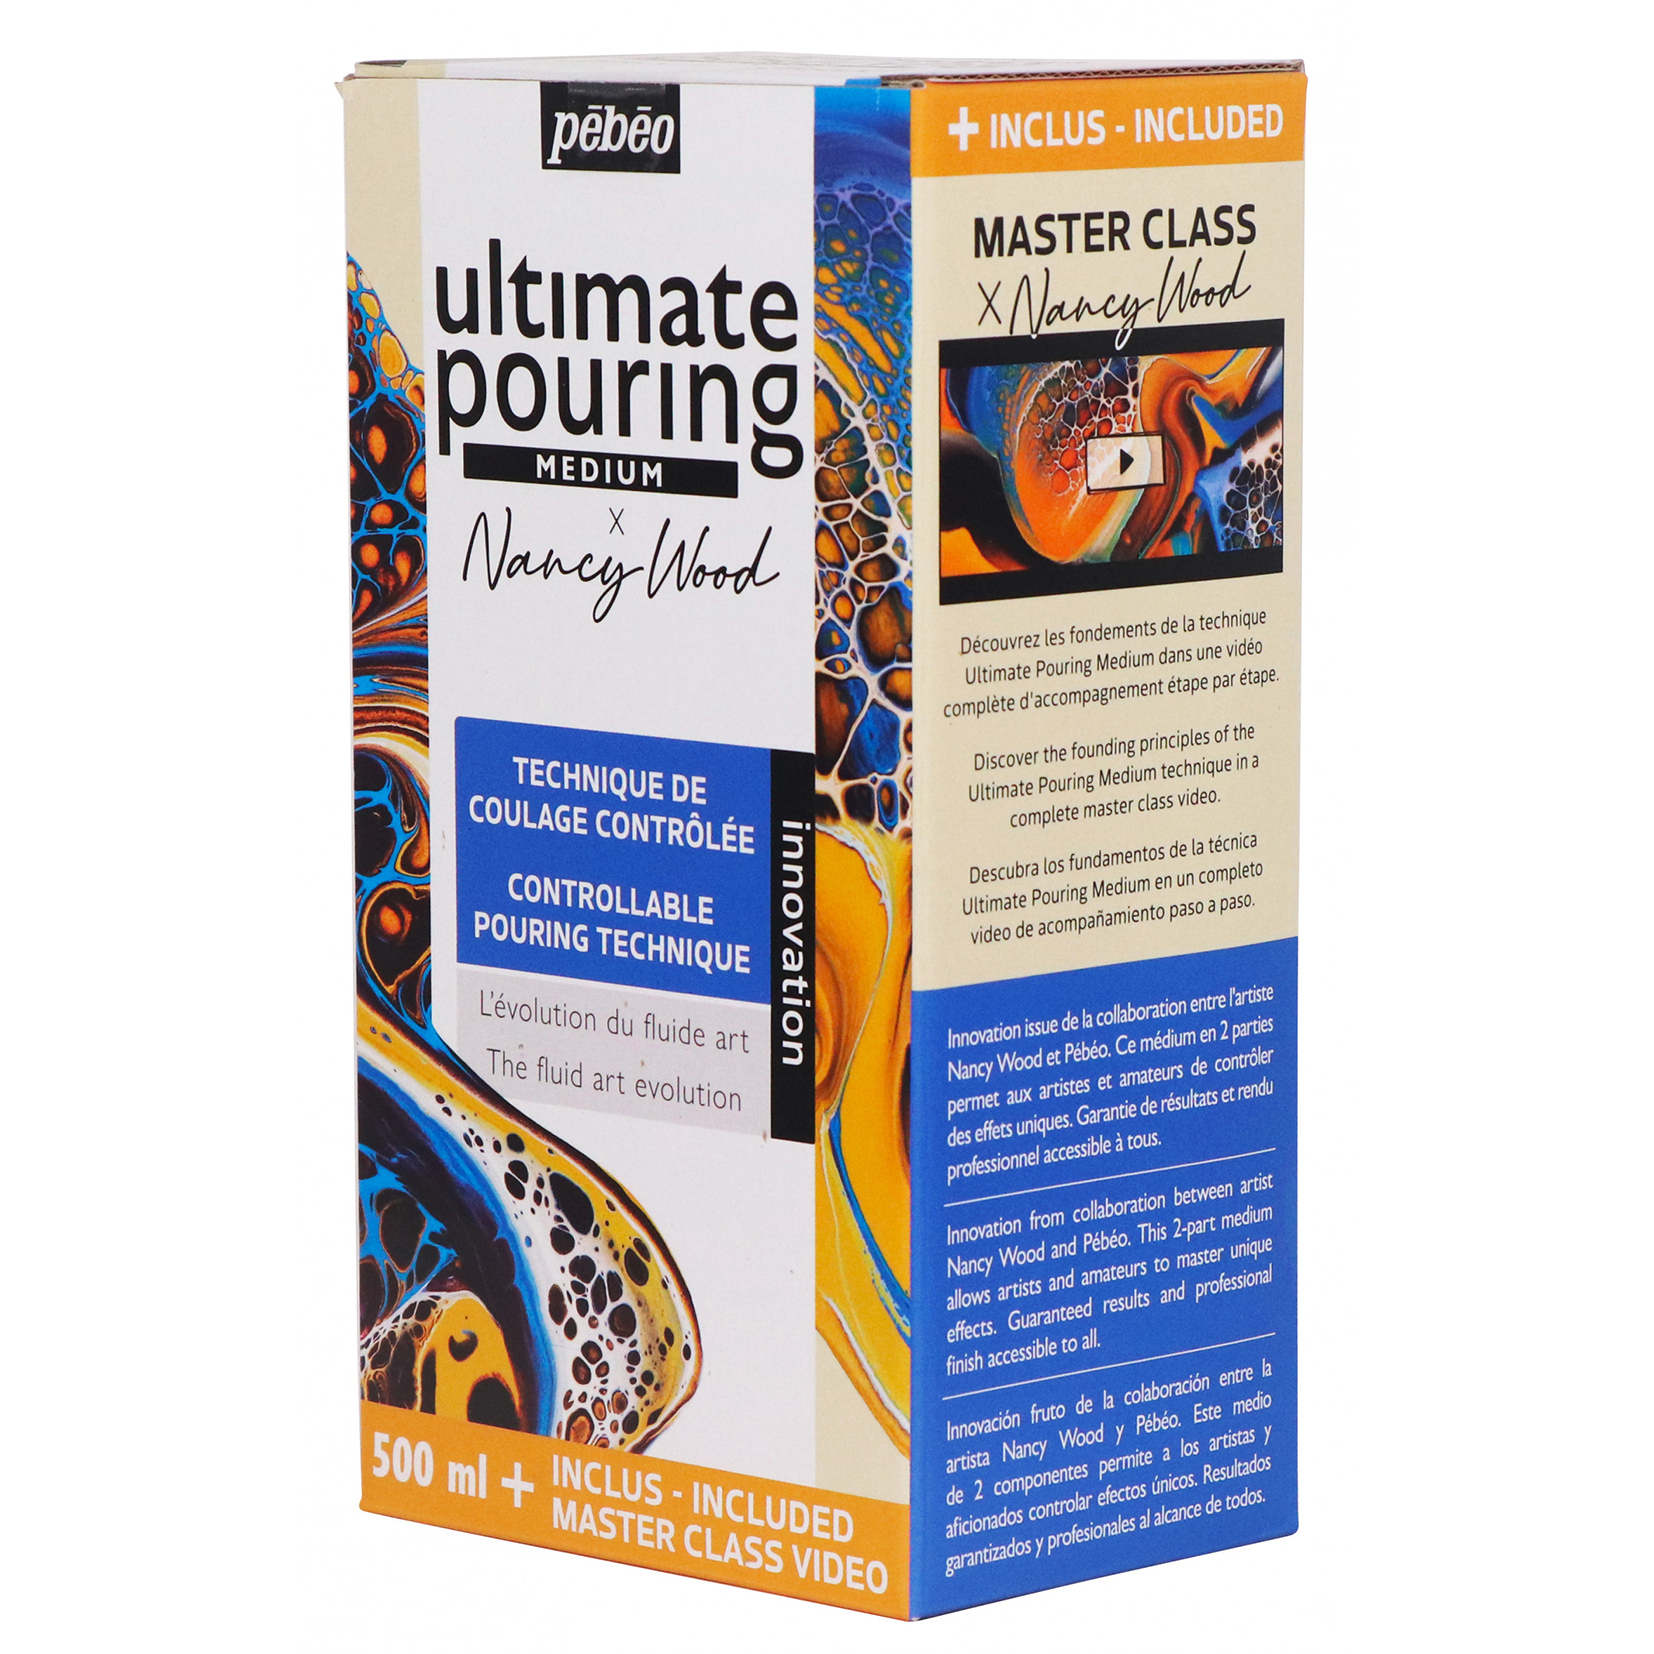 Pebeo Ultimate Pouring Medium - Discovery Set